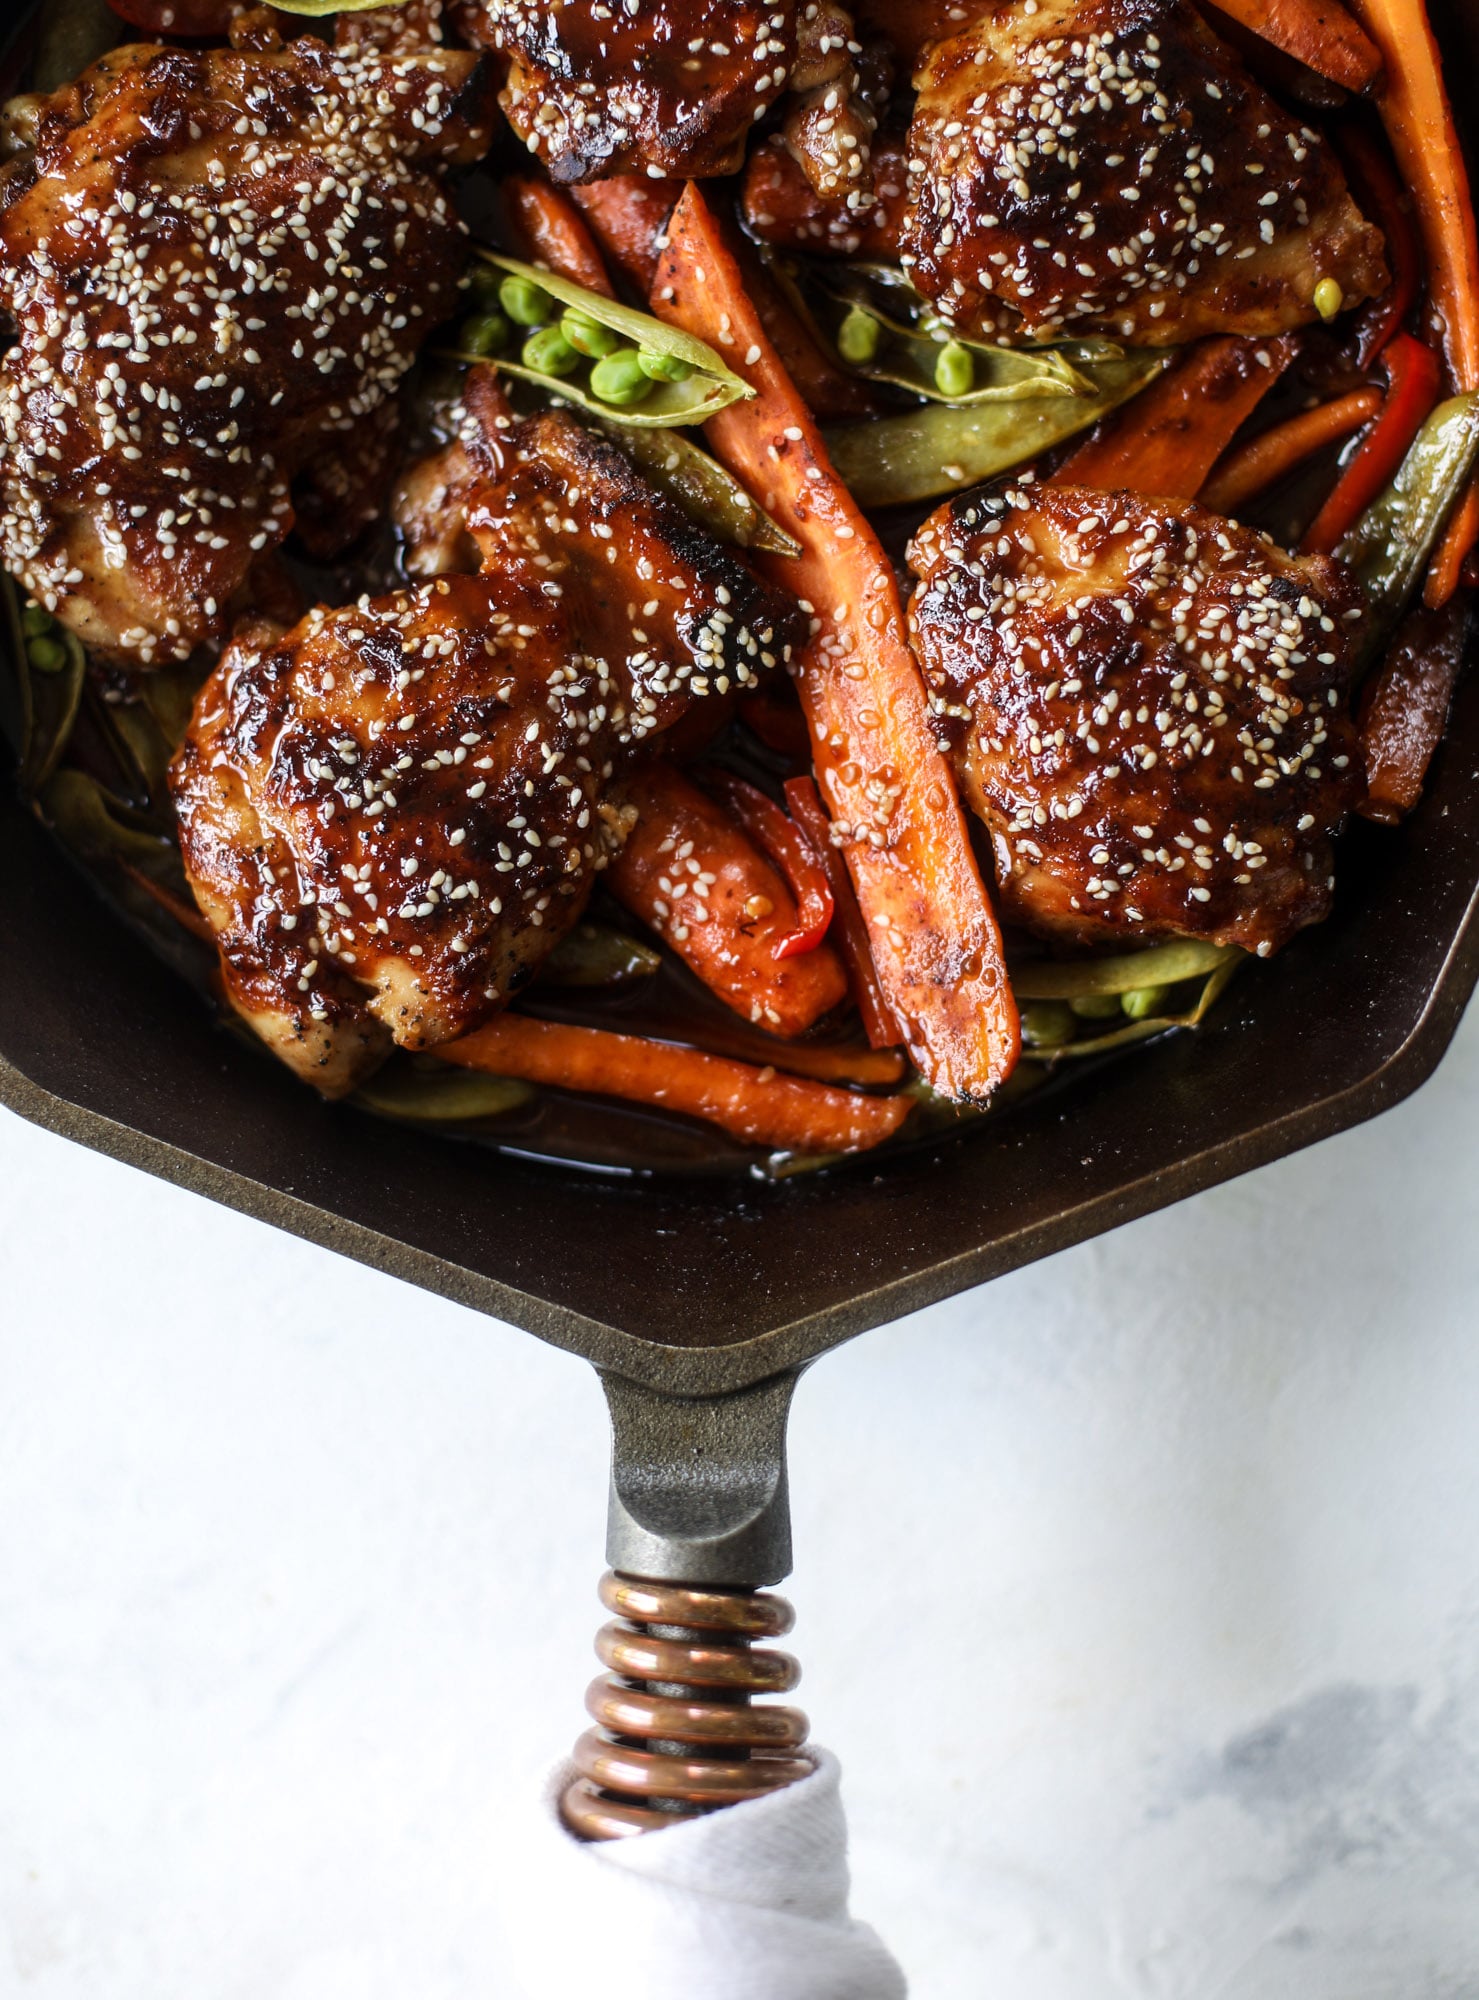 This one pan sesame chicken and veggies is so easy and delicious! It's the perfect weeknight meal that is packed with flavor. The chicken and veggies are great on their own but also wonderful when paired with brown rice or quinoa! I howsweeteats.com #one #pan #sesame #chicken #dinner #easy